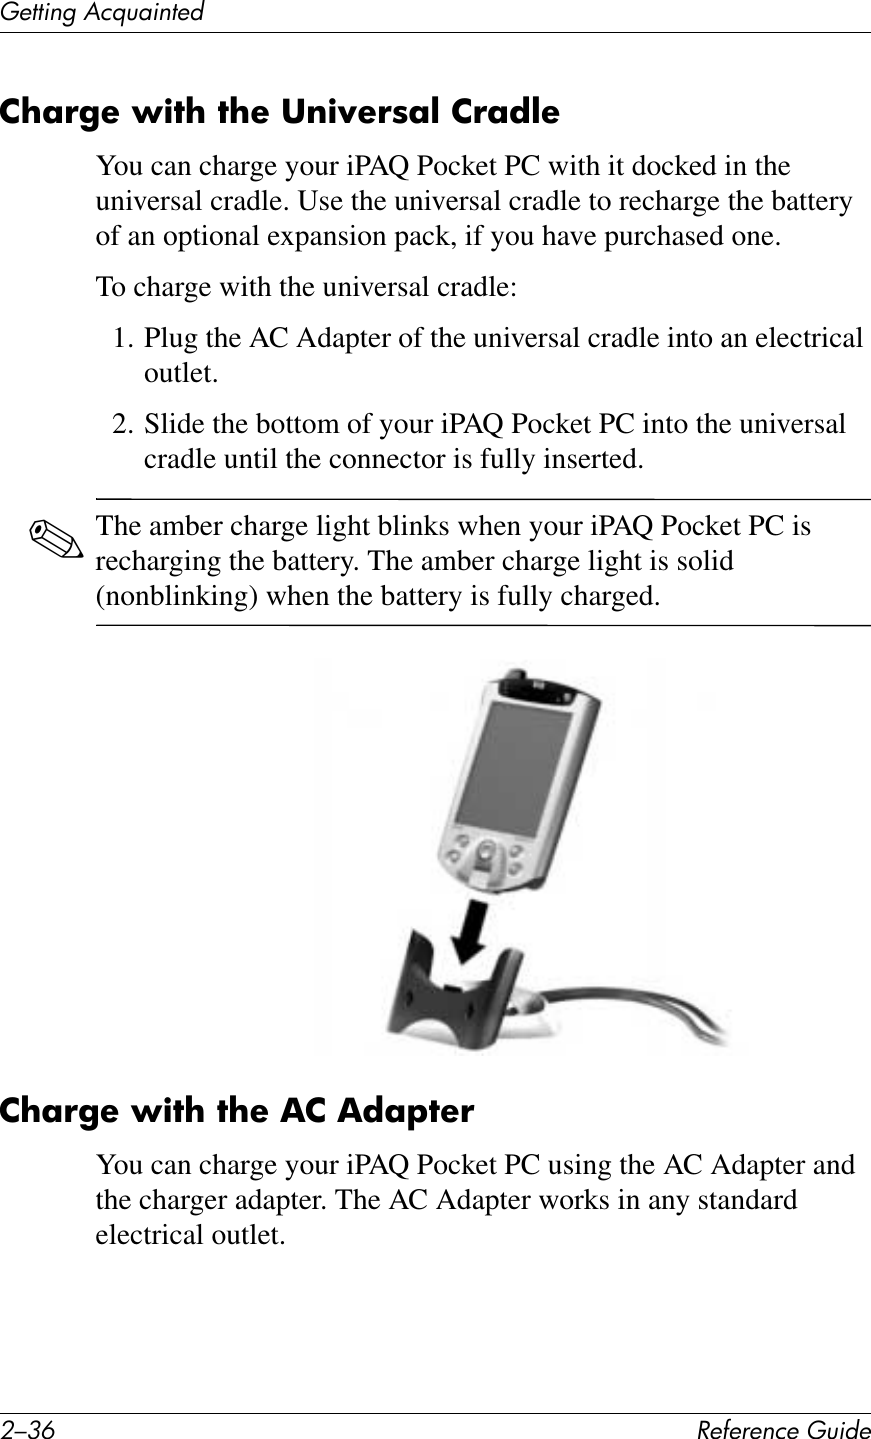 0/9E !&quot;#&quot;$&quot;%&amp;&quot;&apos;()*+&quot;(&quot;11*%2&apos;&lt;&amp;T)4*%1&quot;+2?;!&apos;&quot;&amp;L)7?&amp;7?&quot;&amp;3$)N&quot;!8;@&amp;2!;*@&quot;You can charge your iPAQ Pocket PC with it docked in the universal cradle. Use the universal cradle to recharge the battery of an optional expansion pack, if you have purchased one.To charge with the universal cradle:1. Plug the AC Adapter of the universal cradle into an electrical outlet.2. Slide the bottom of your iPAQ Pocket PC into the universal cradle until the connector is fully inserted.✎The amber charge light blinks when your iPAQ Pocket PC is recharging the battery. The amber charge light is solid (nonblinking) when the battery is fully charged.2?;!&apos;&quot;&amp;L)7?&amp;7?&quot;&amp;,2&amp;,*;F7&quot;!You can charge your iPAQ Pocket PC using the AC Adapter and the charger adapter. The AC Adapter works in any standard electrical outlet.